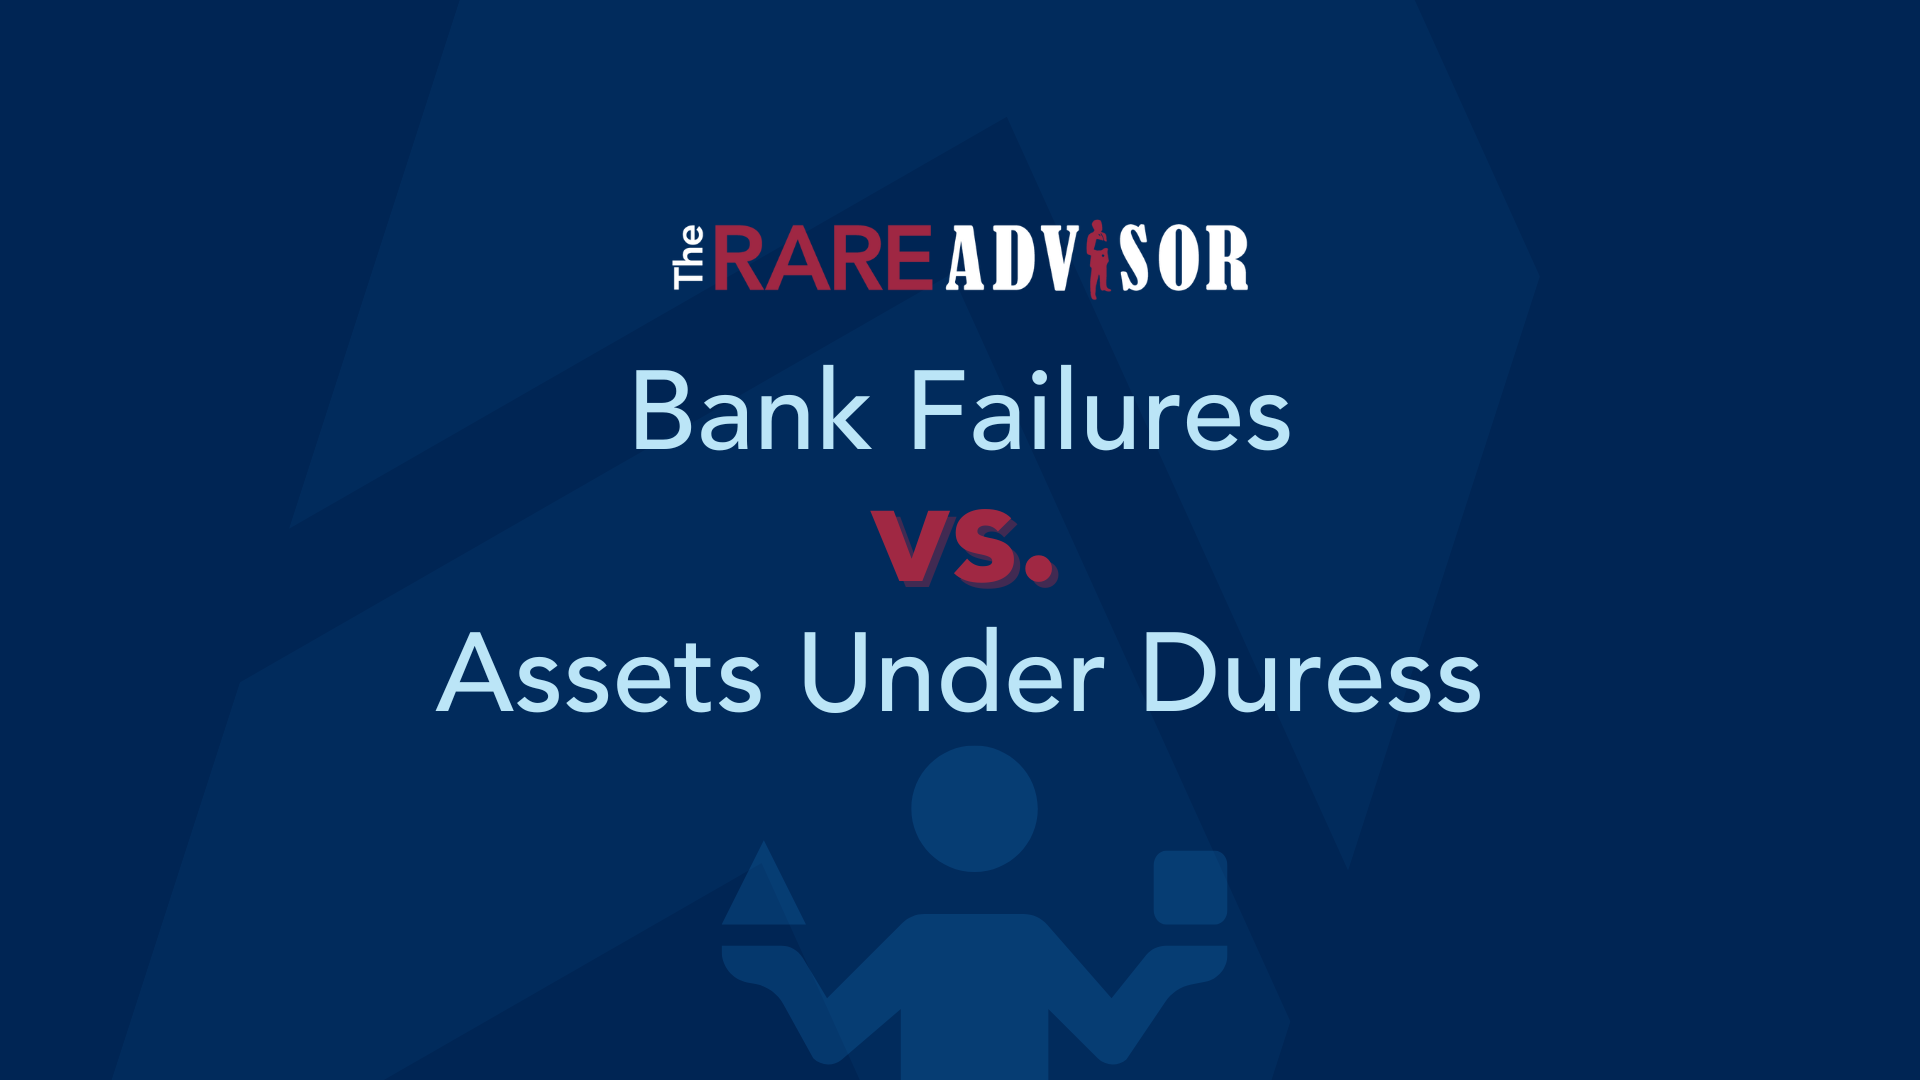 The RARE Advisor: Comparing the Bank Failure to Assets Under Duress Ratio